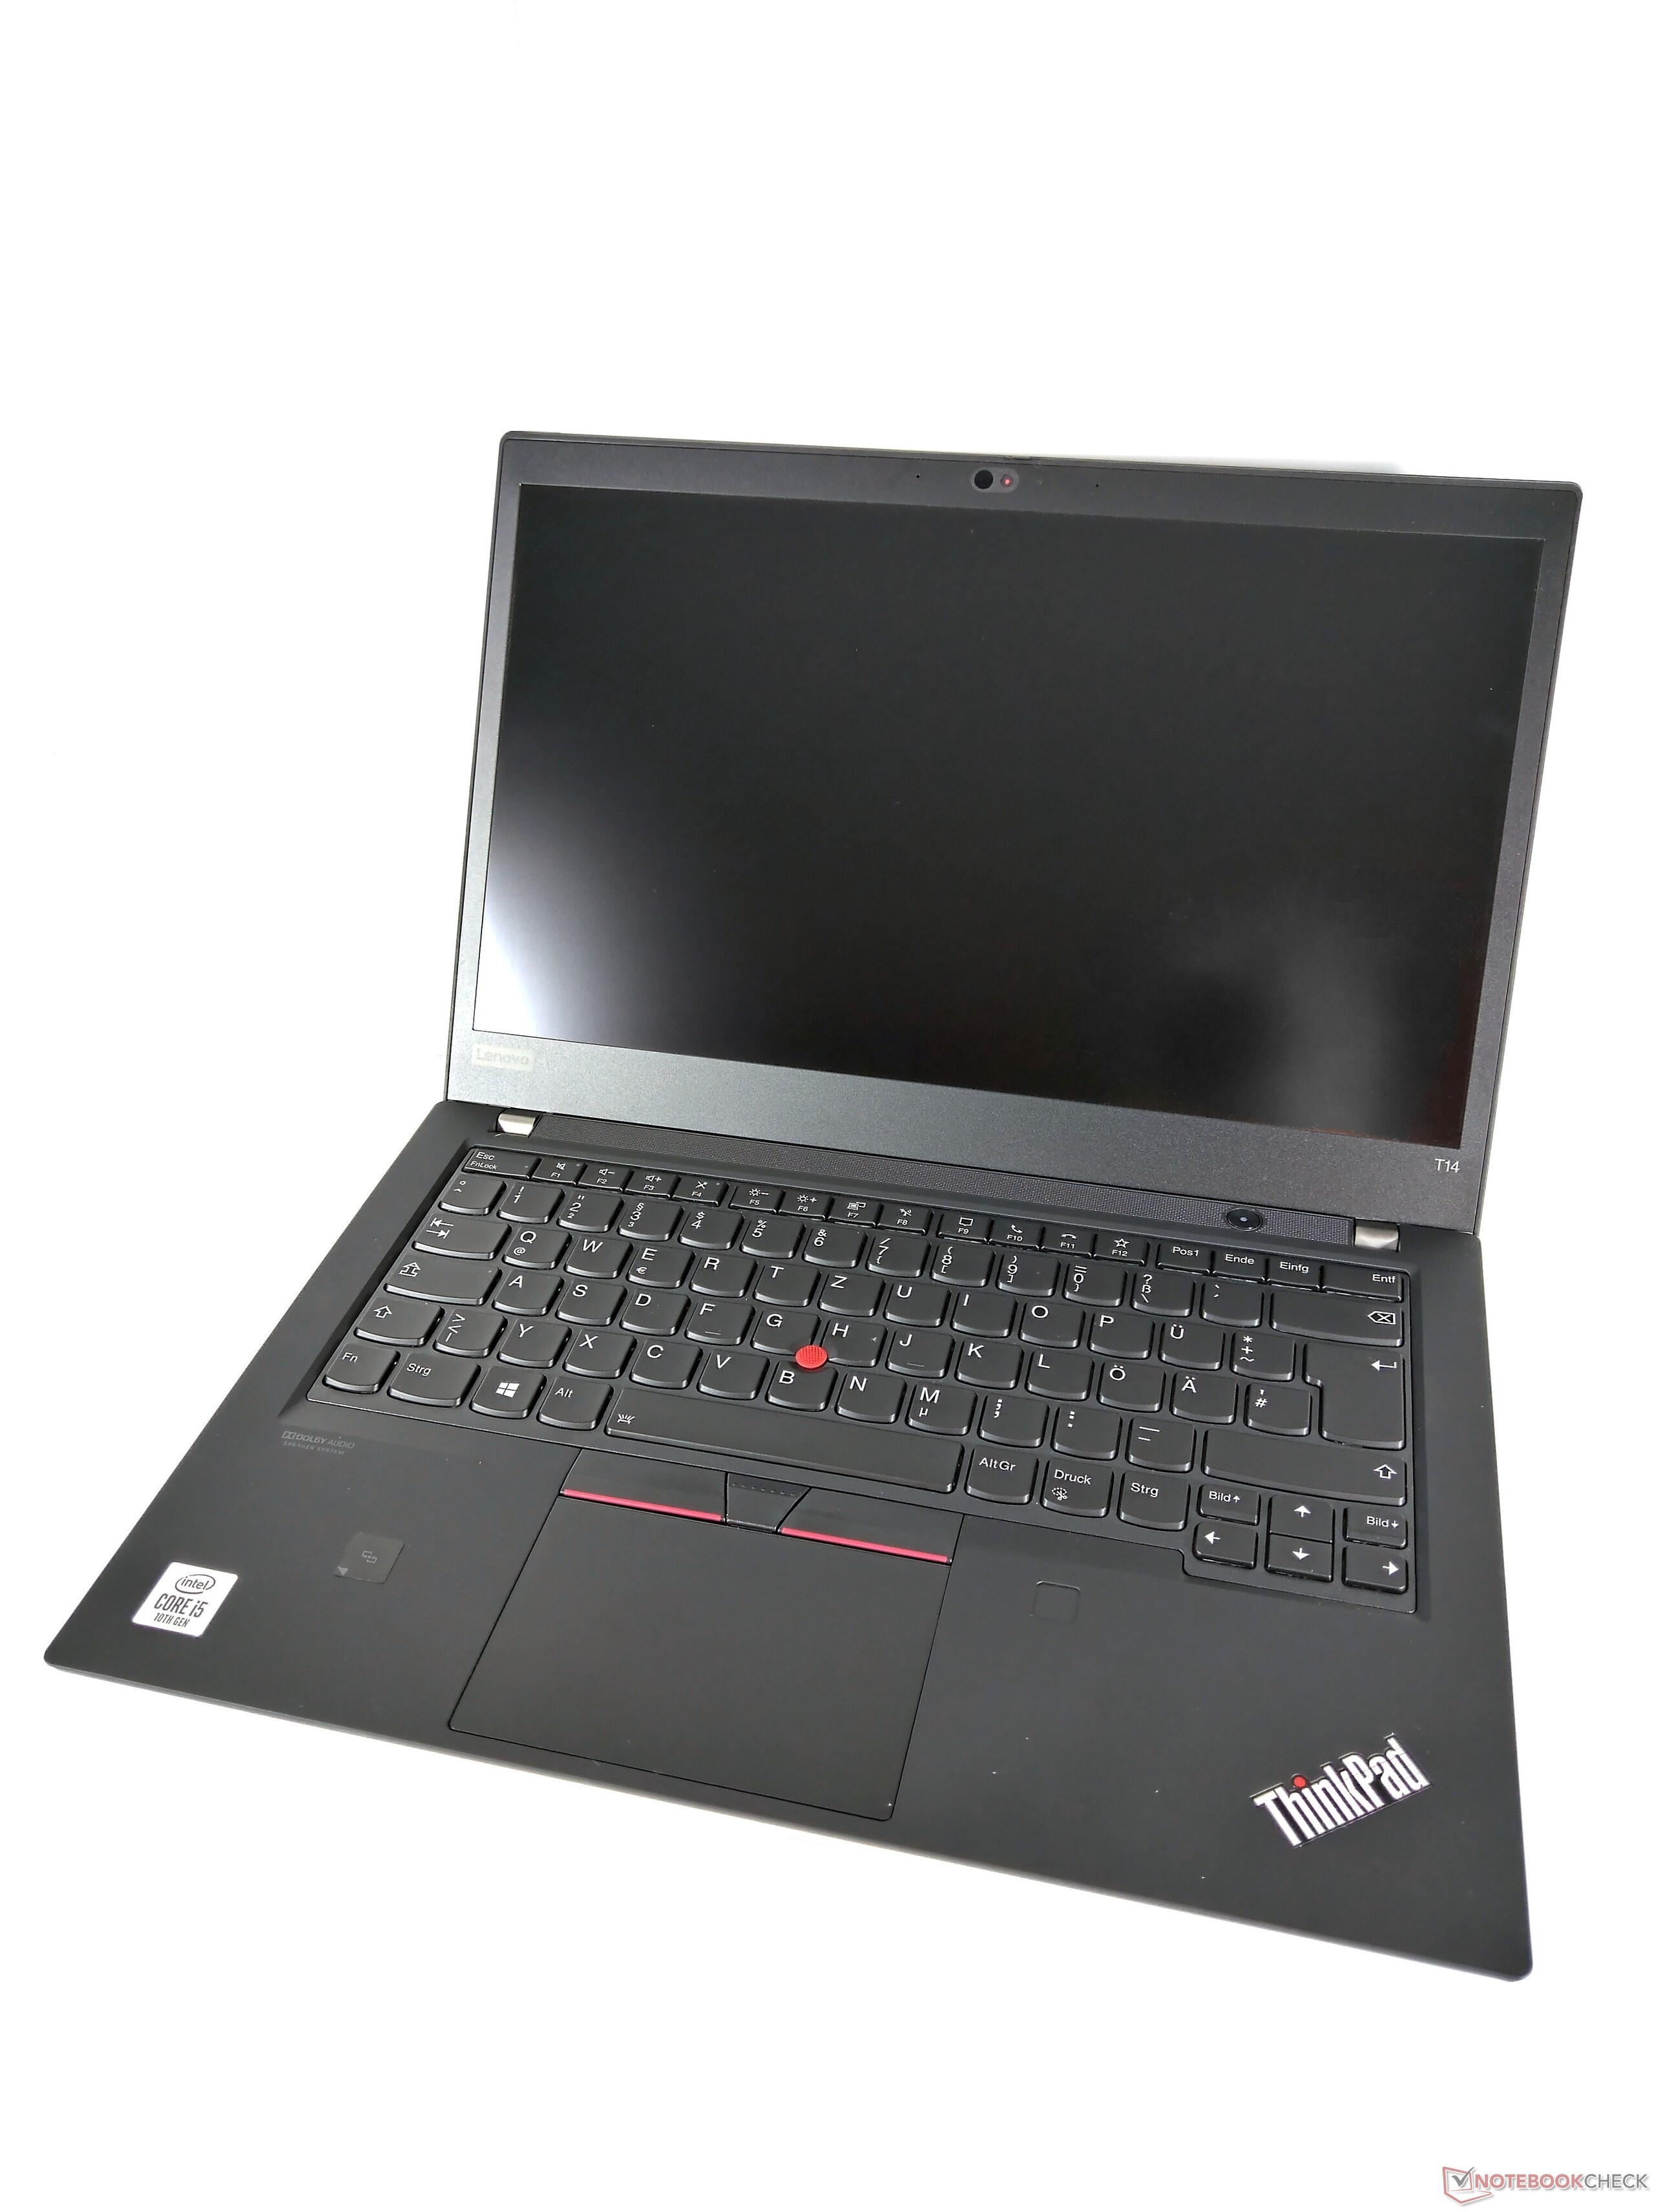 Lenovo ThinkPad T14 laptop review: Comet Lake update doesn't add much -   Reviews